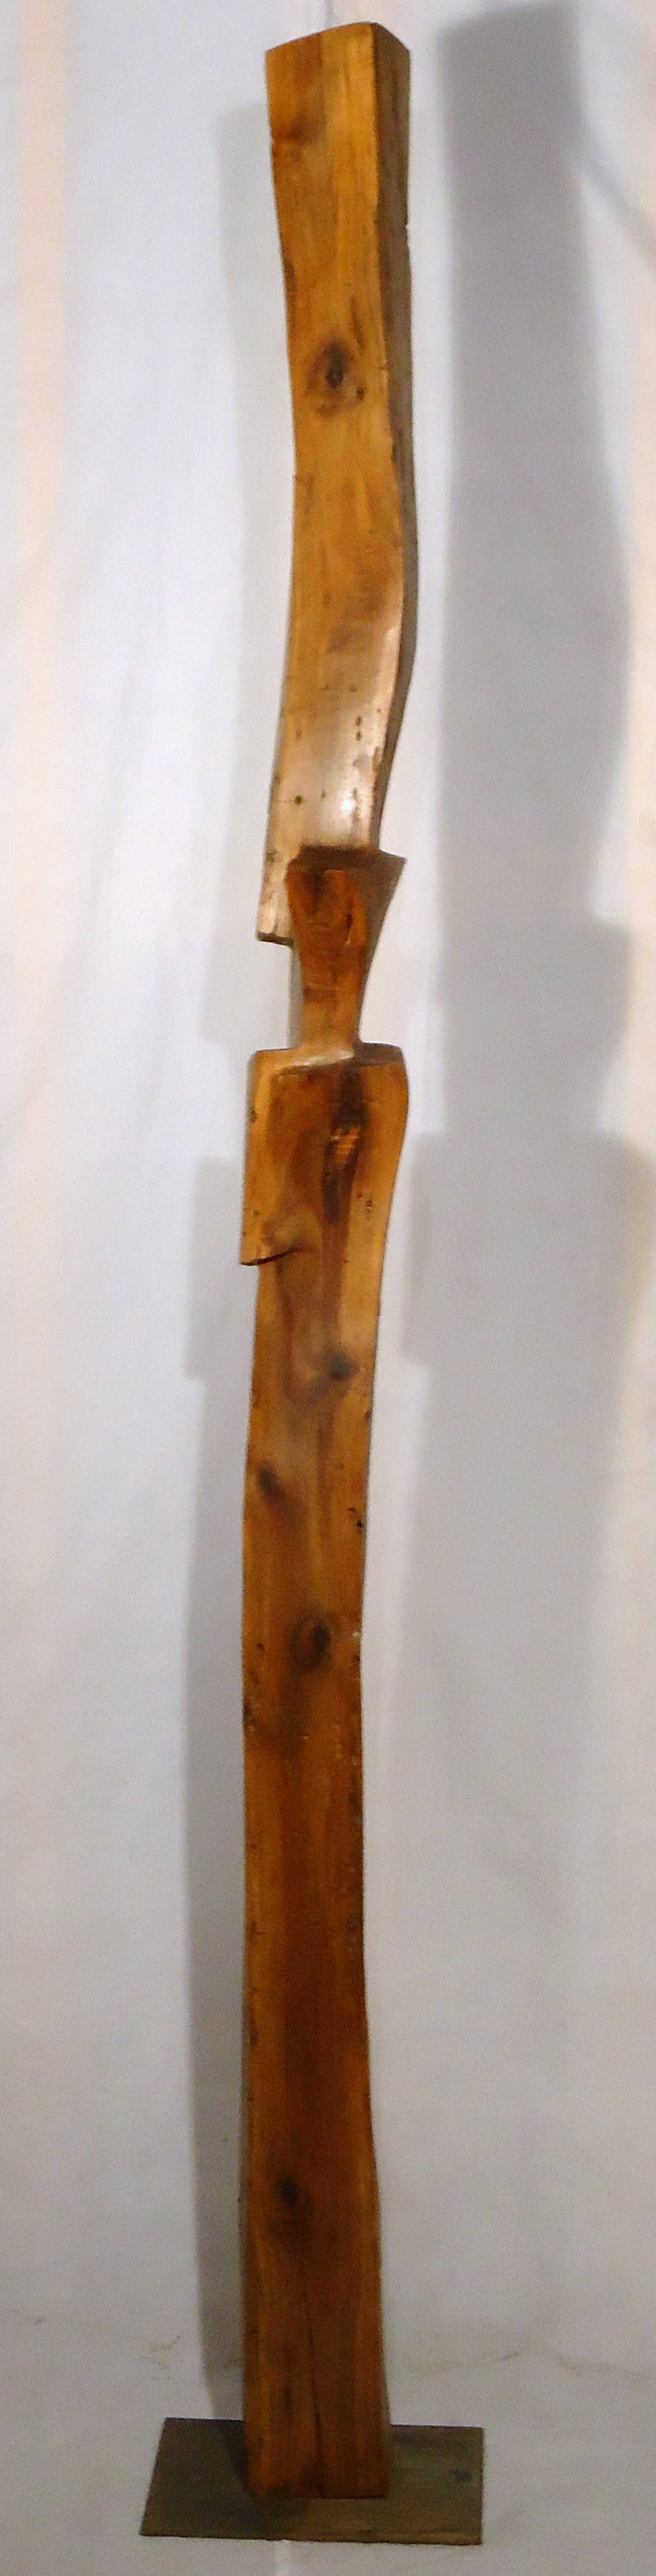 American Hand-Carved Studio Mesquite Stele in the Style of J. B. Blunk, circa 1970 For Sale